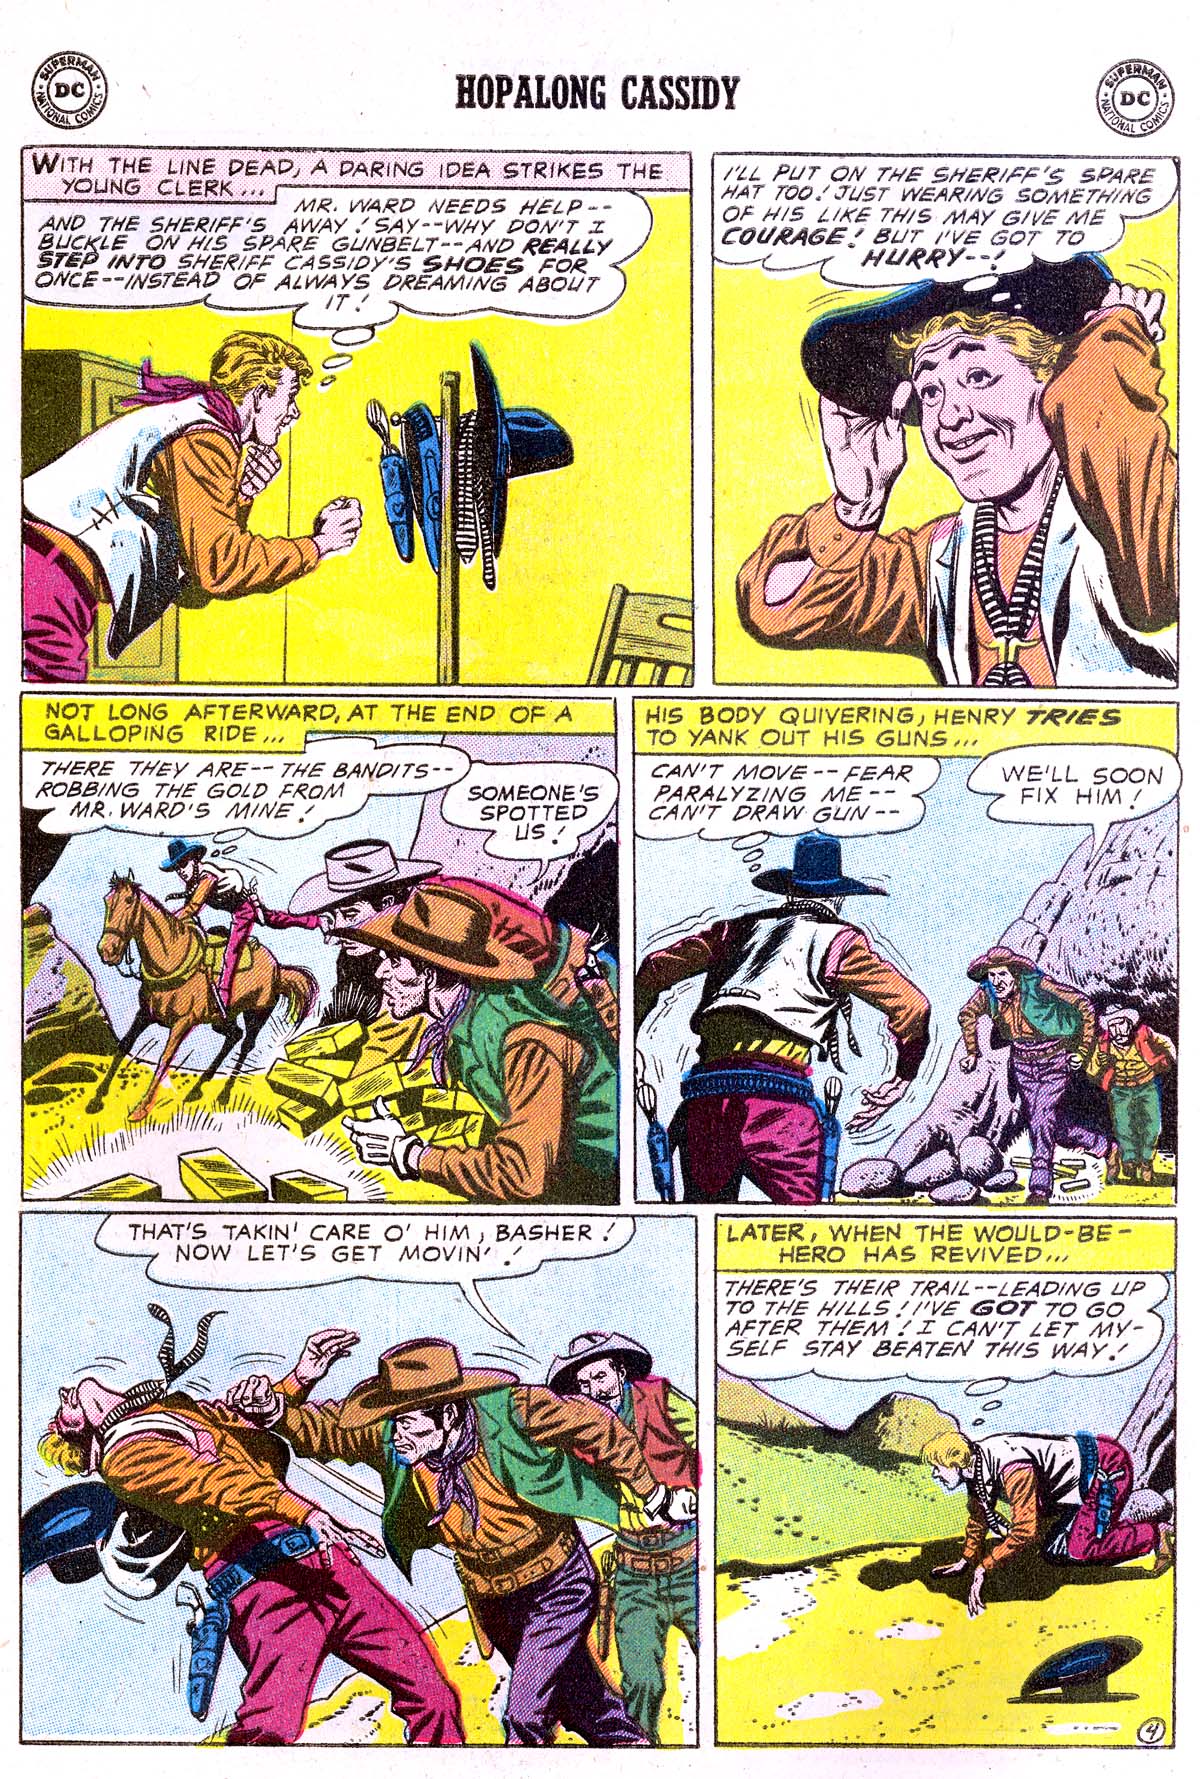 Read online Hopalong Cassidy comic -  Issue #119 - 6